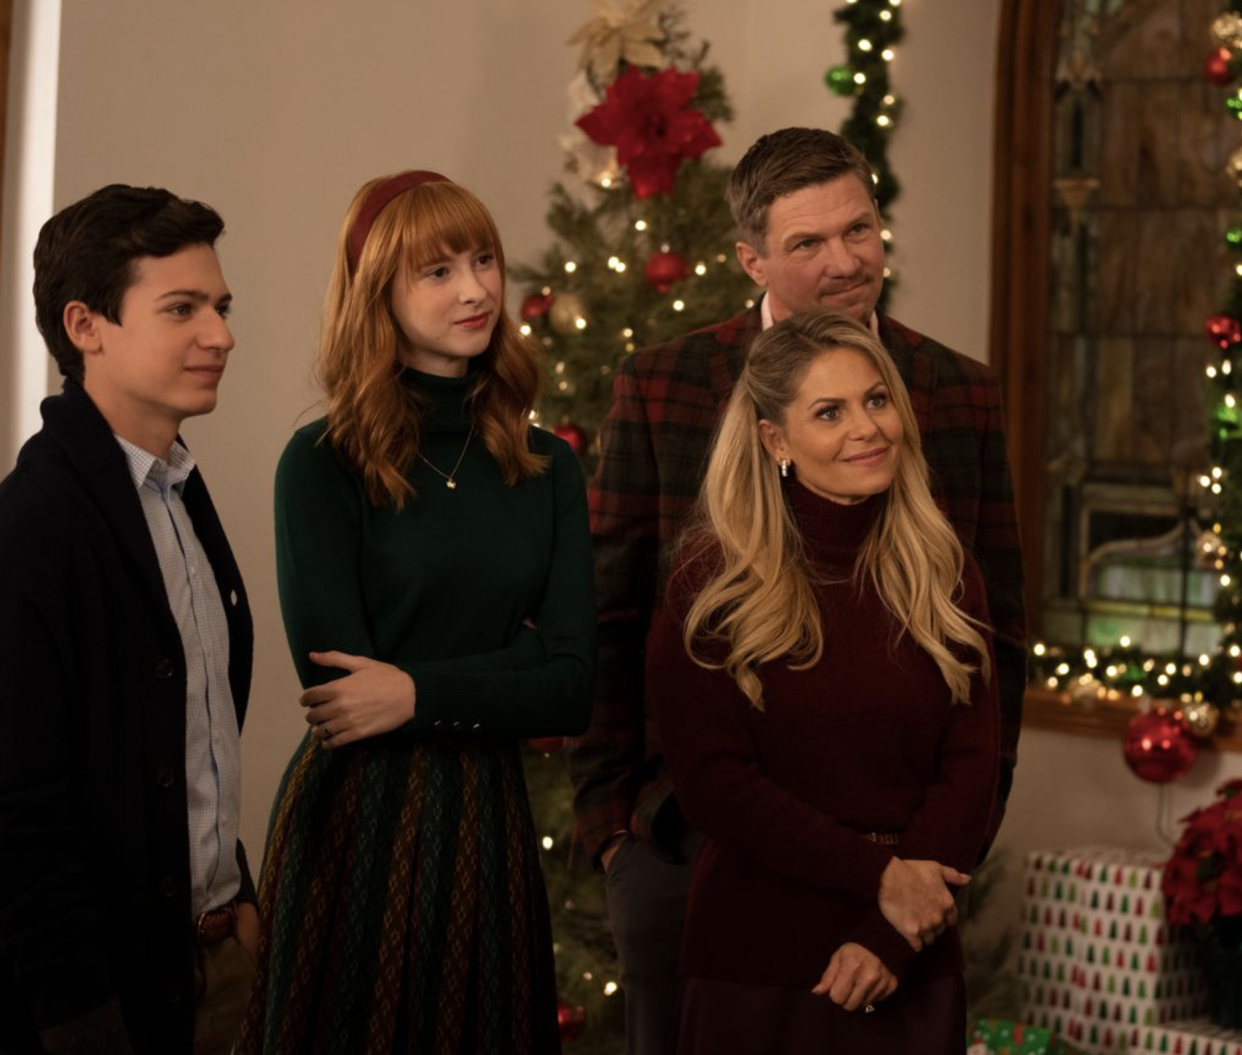 Candace Cameron Bure in A Christmas…Present. (Photo: Great American Media)
